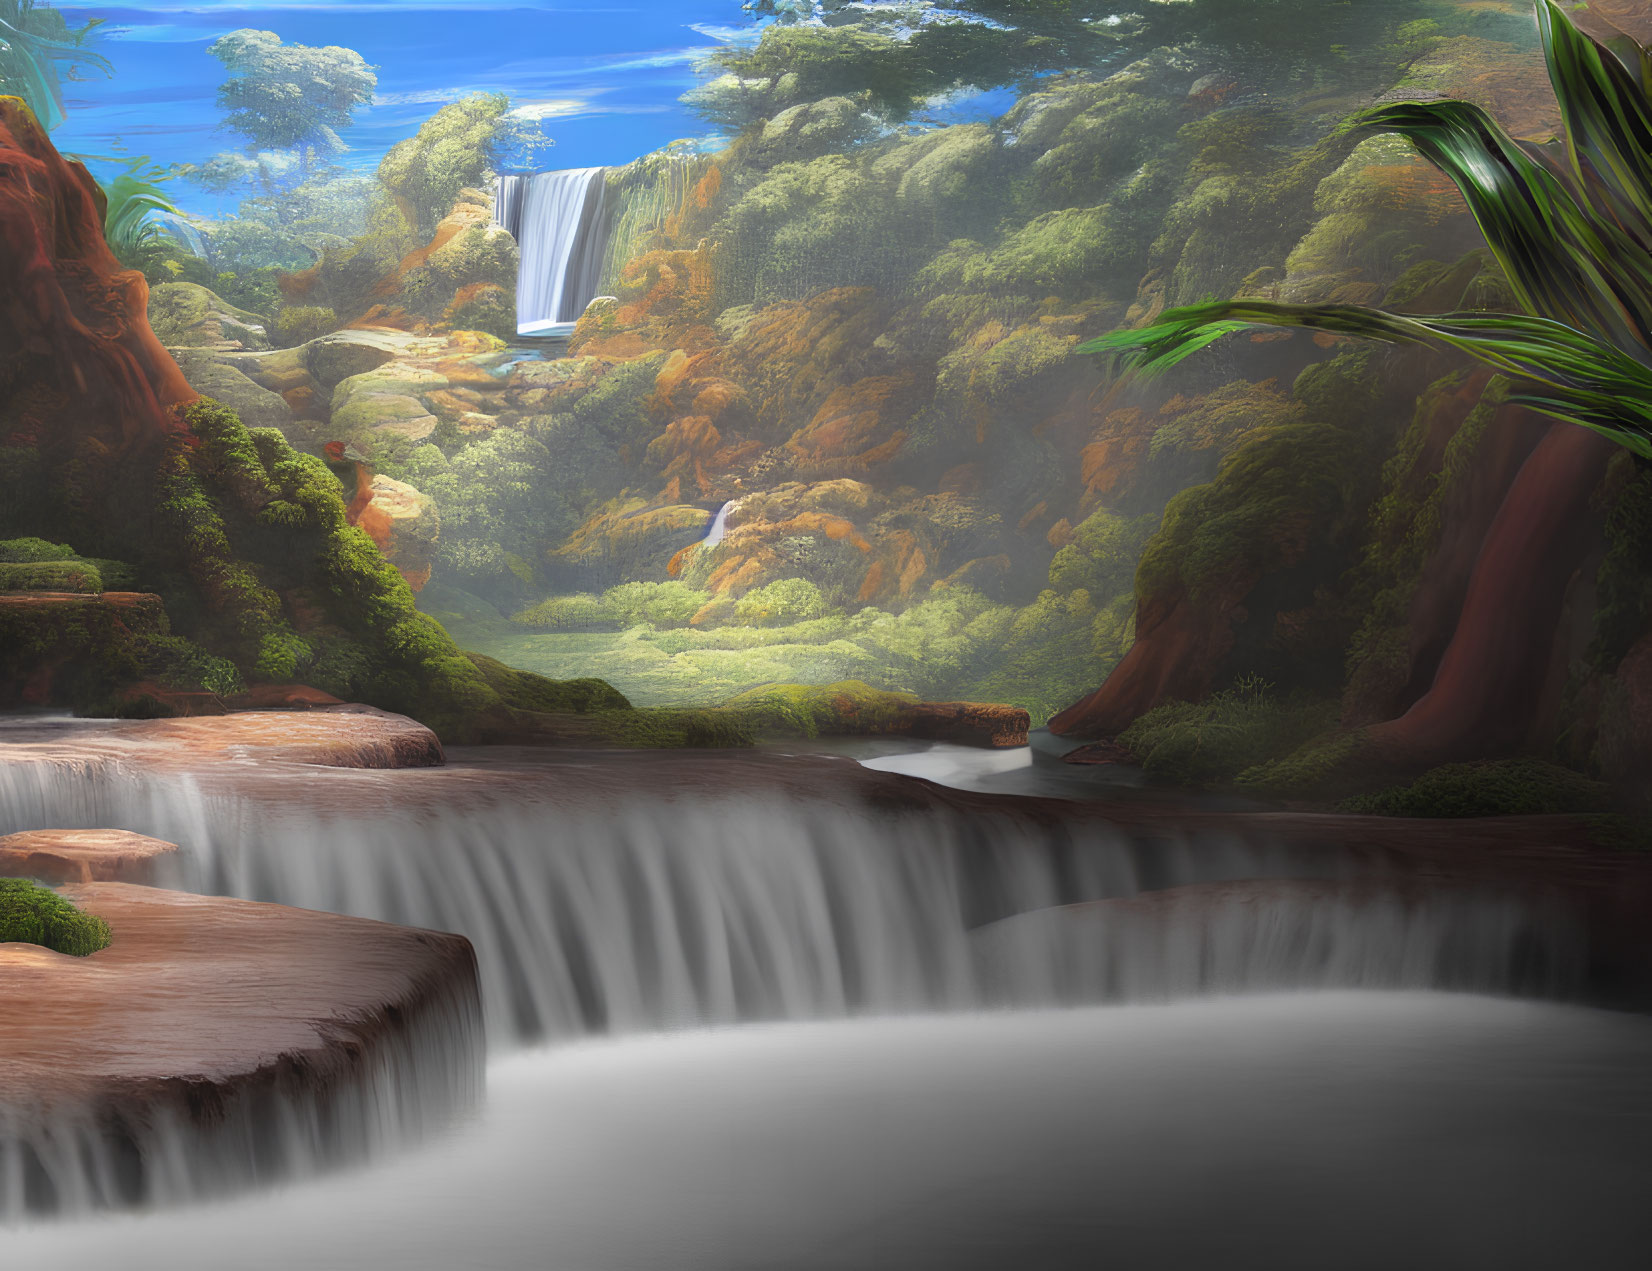 Tranquil forest scene with tropical waterfall